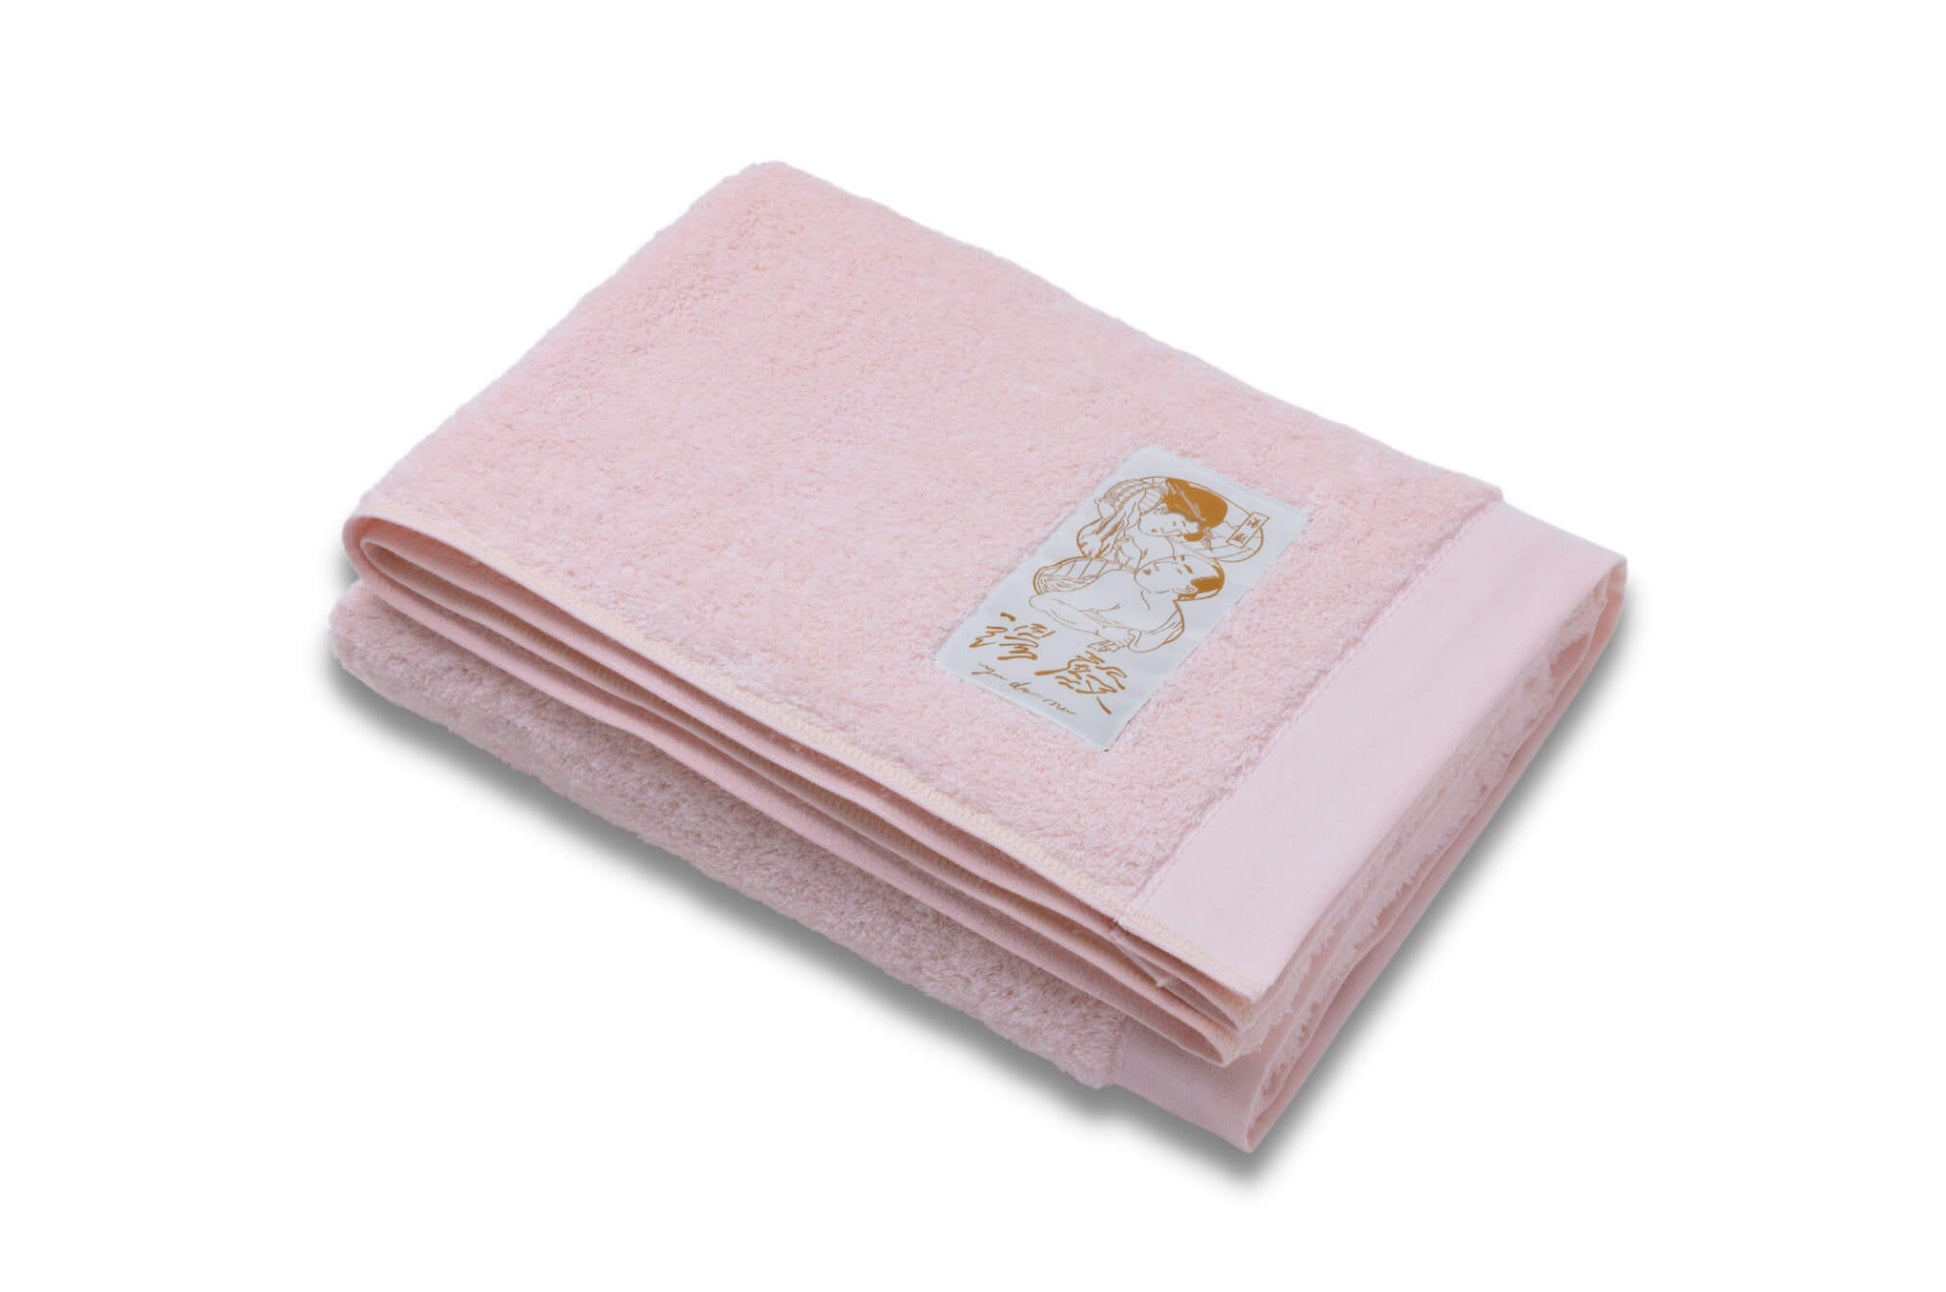 Pink color of Japanese Bath Towel from Japarcana